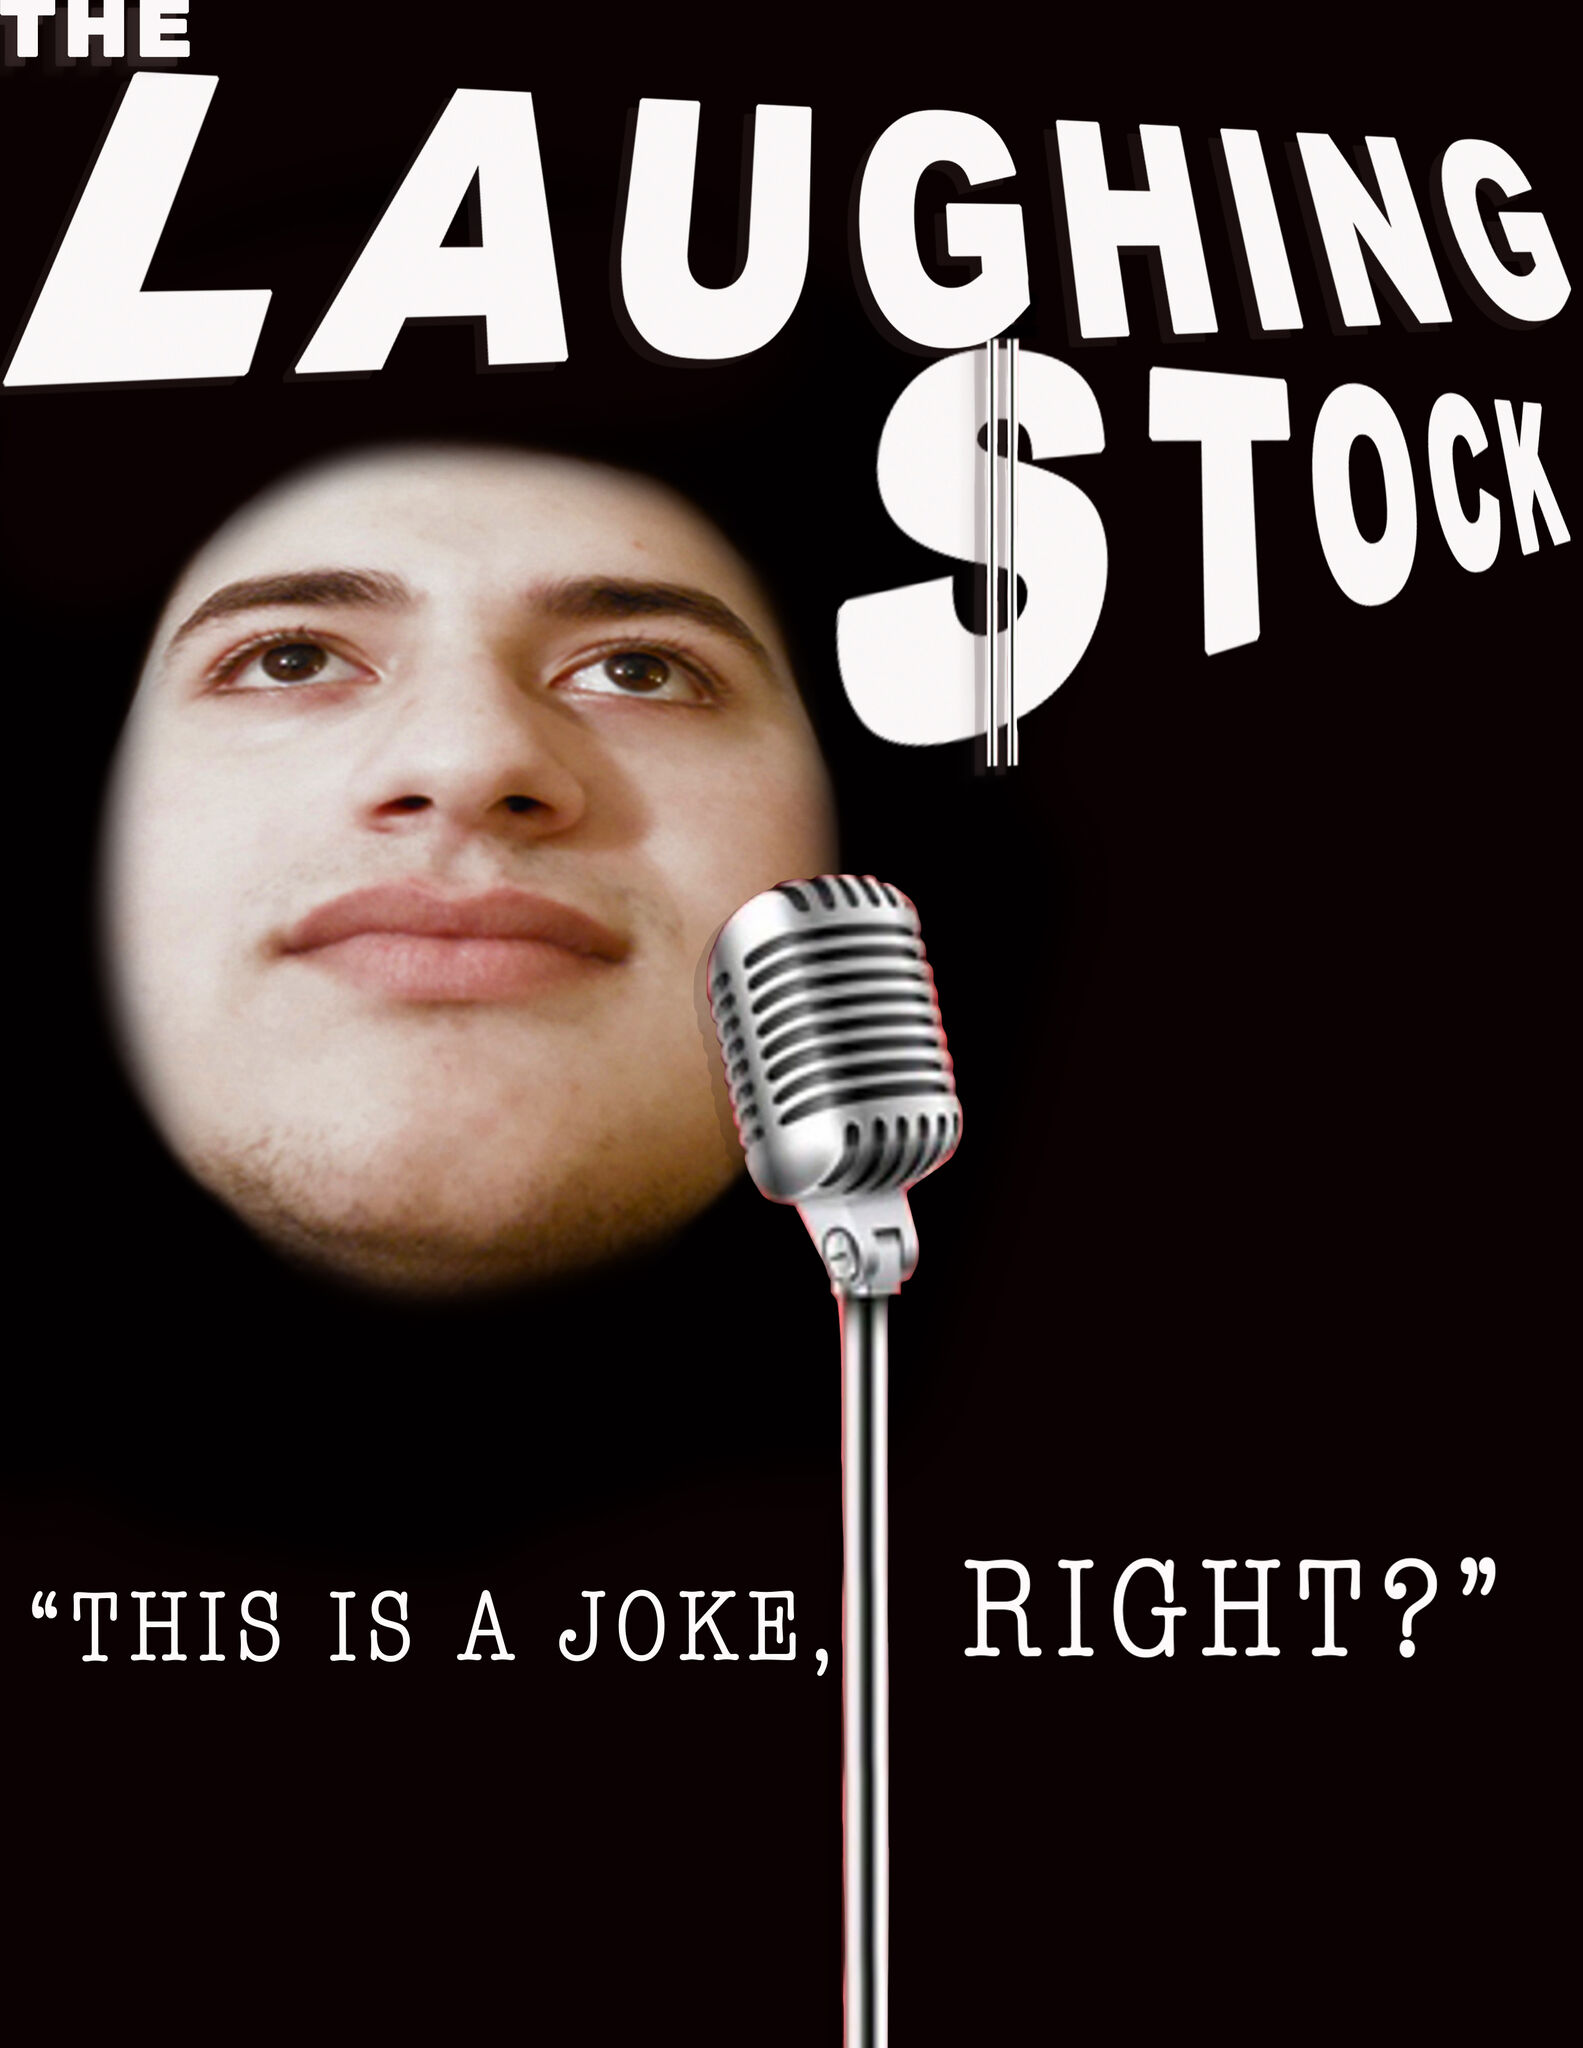 THE LAUGHING STOCK